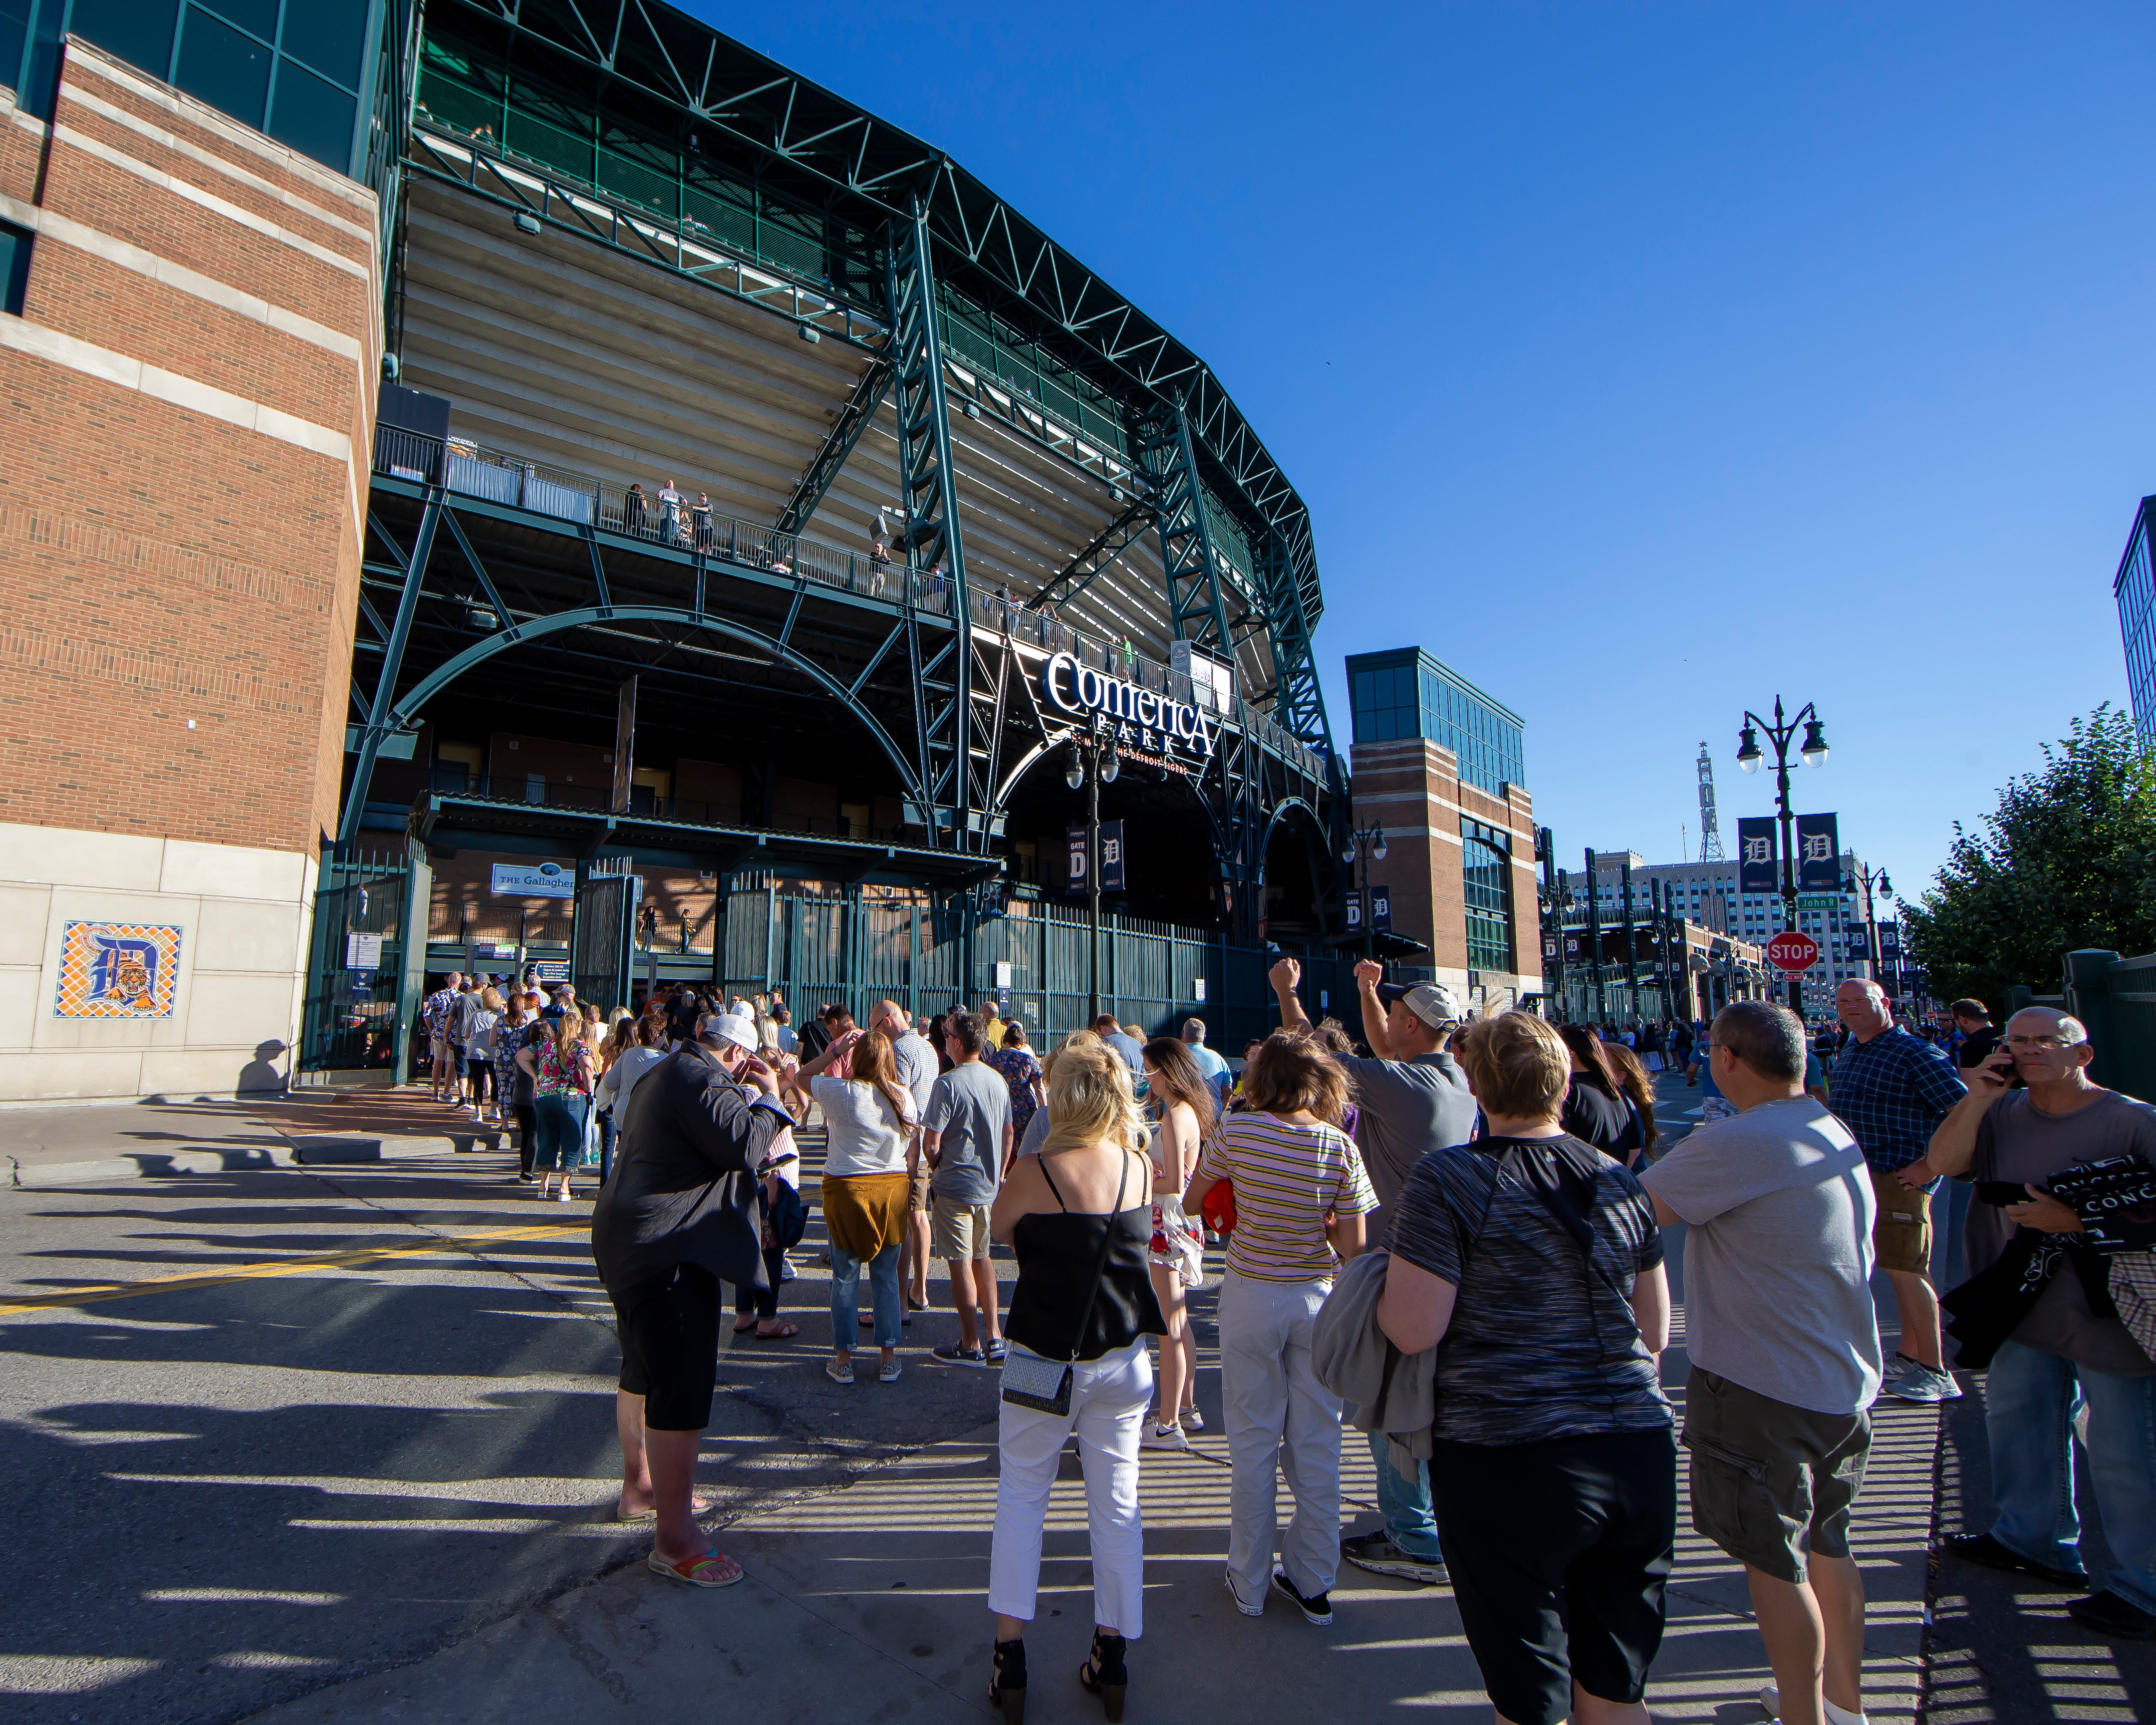 Fans wait in line to attend the Billy Joel concert at Comerica Park.